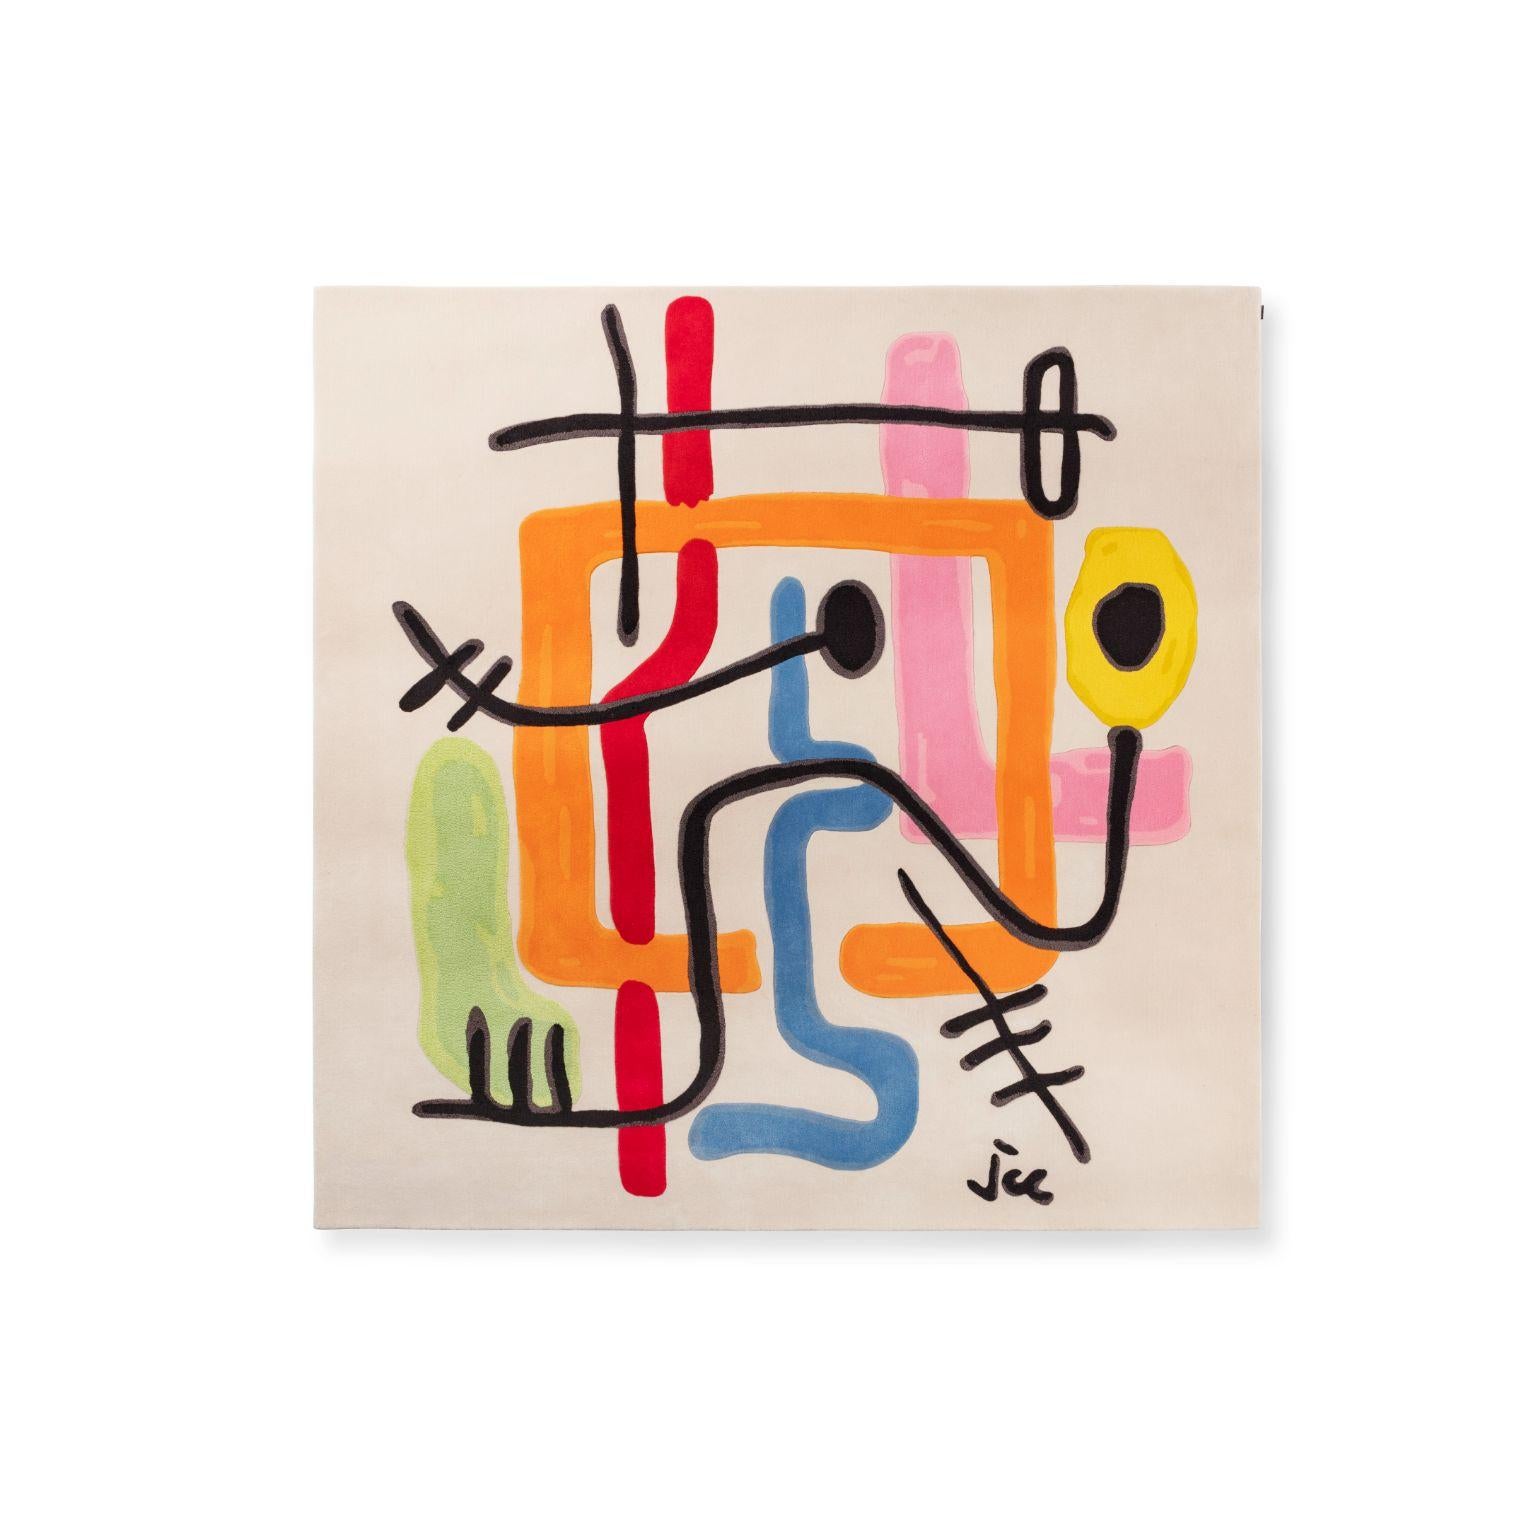 Emotional Traffic rug by Jean-Charles de Castelbajac
Dimensions: W 240 x H 240 cm
Materials: wool
Dimension customization is possible for bigger format only. 

Jean-Charles de Castelbajac is a visionary designer and artist who anticipated the